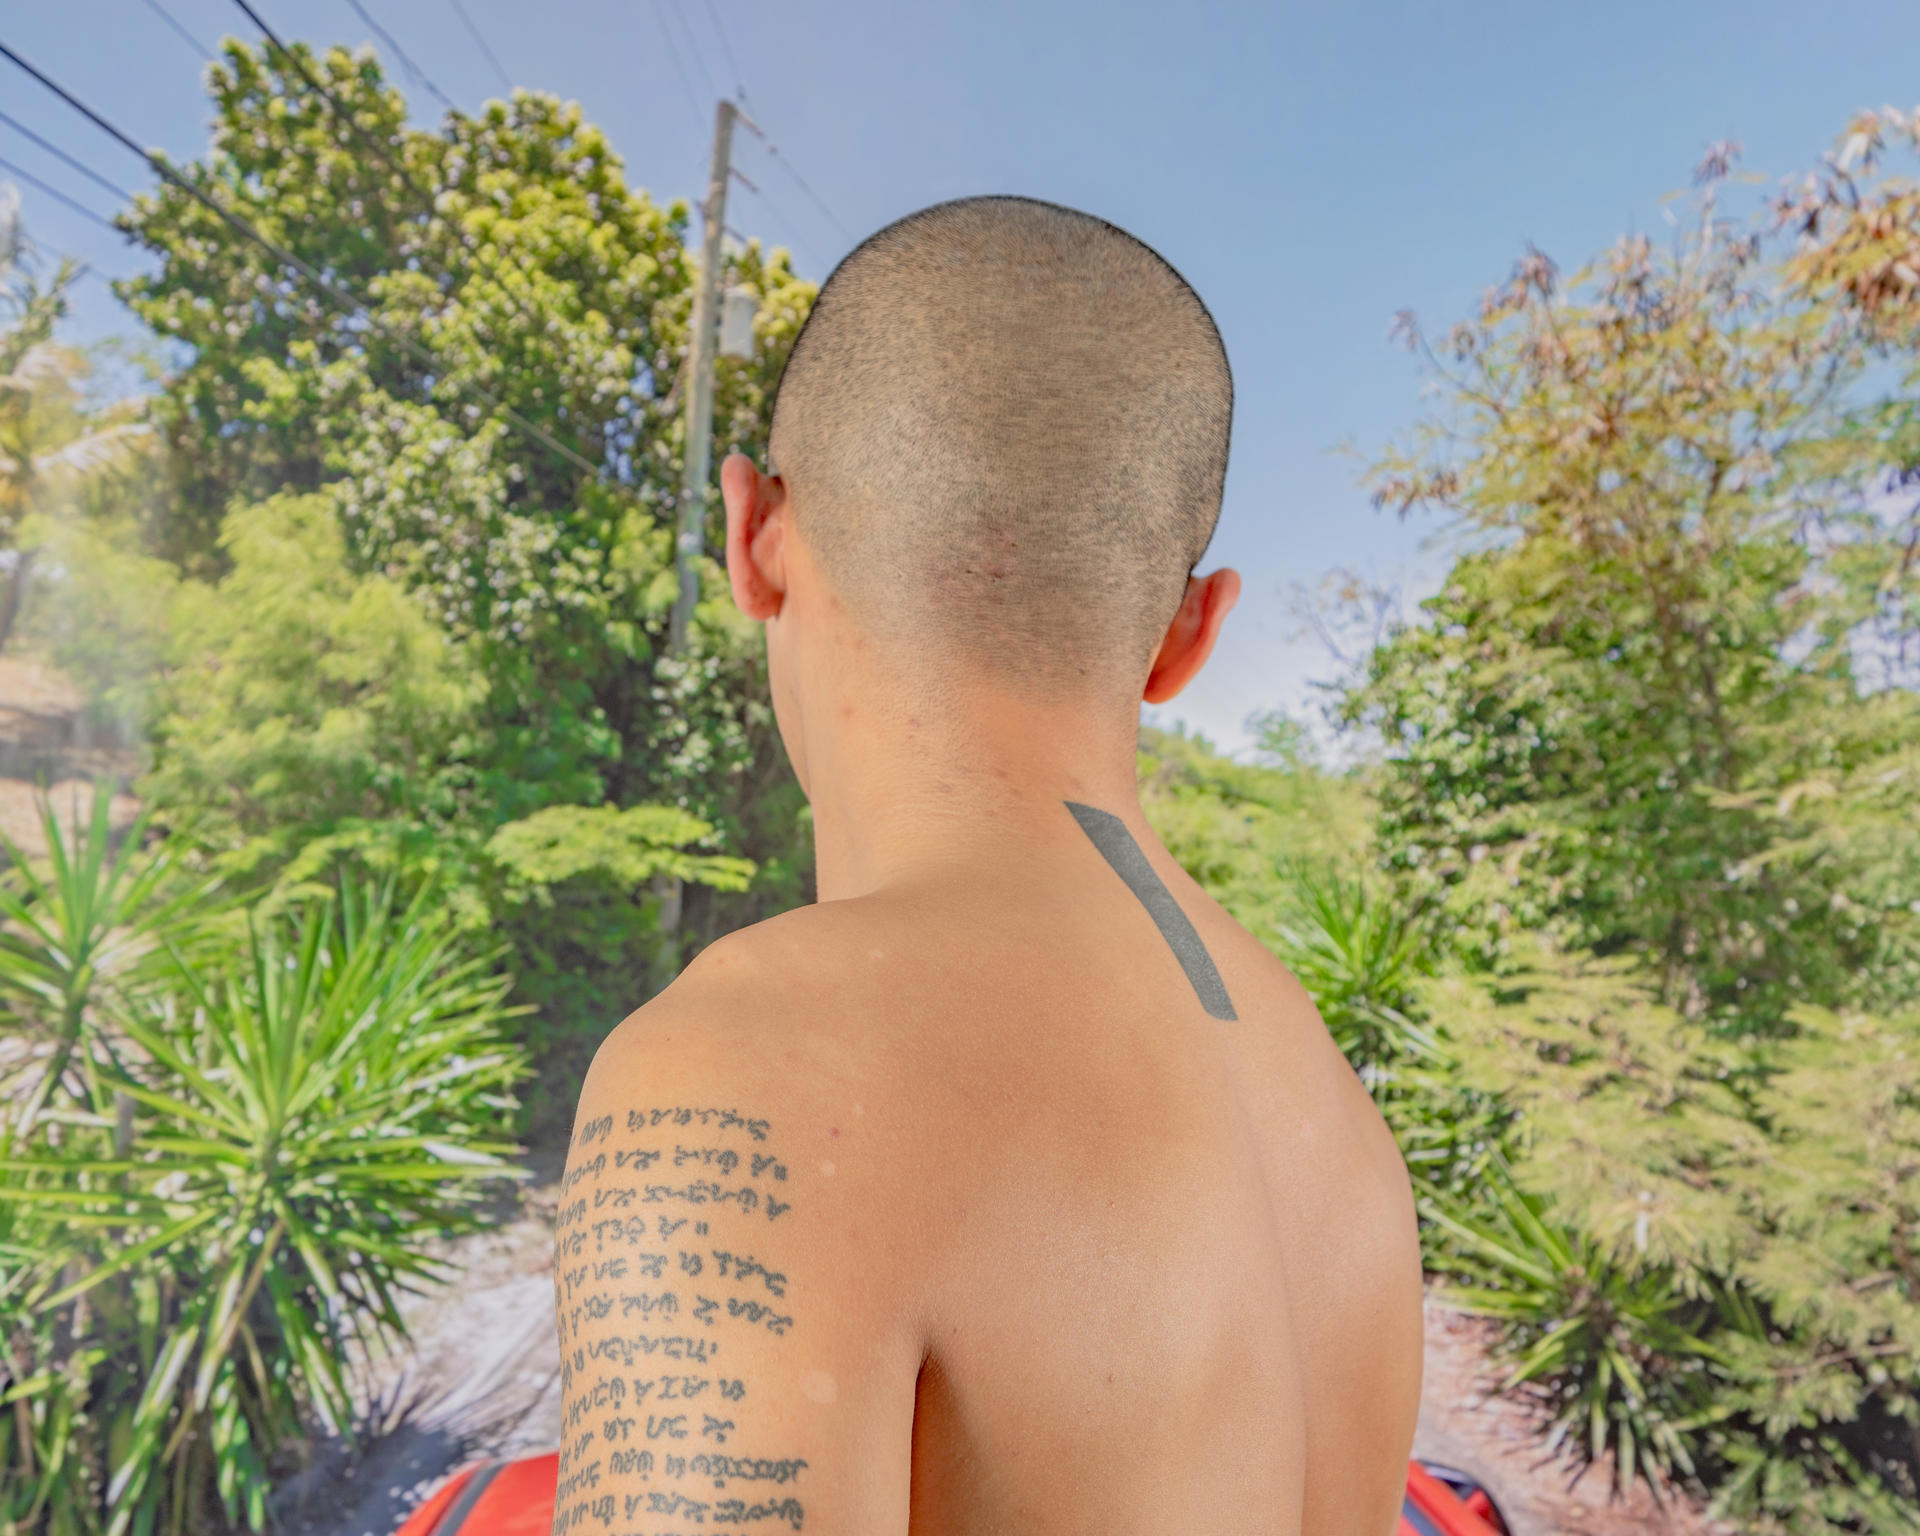 A shirtless man has his back to the camera going toward a tropical landscape.